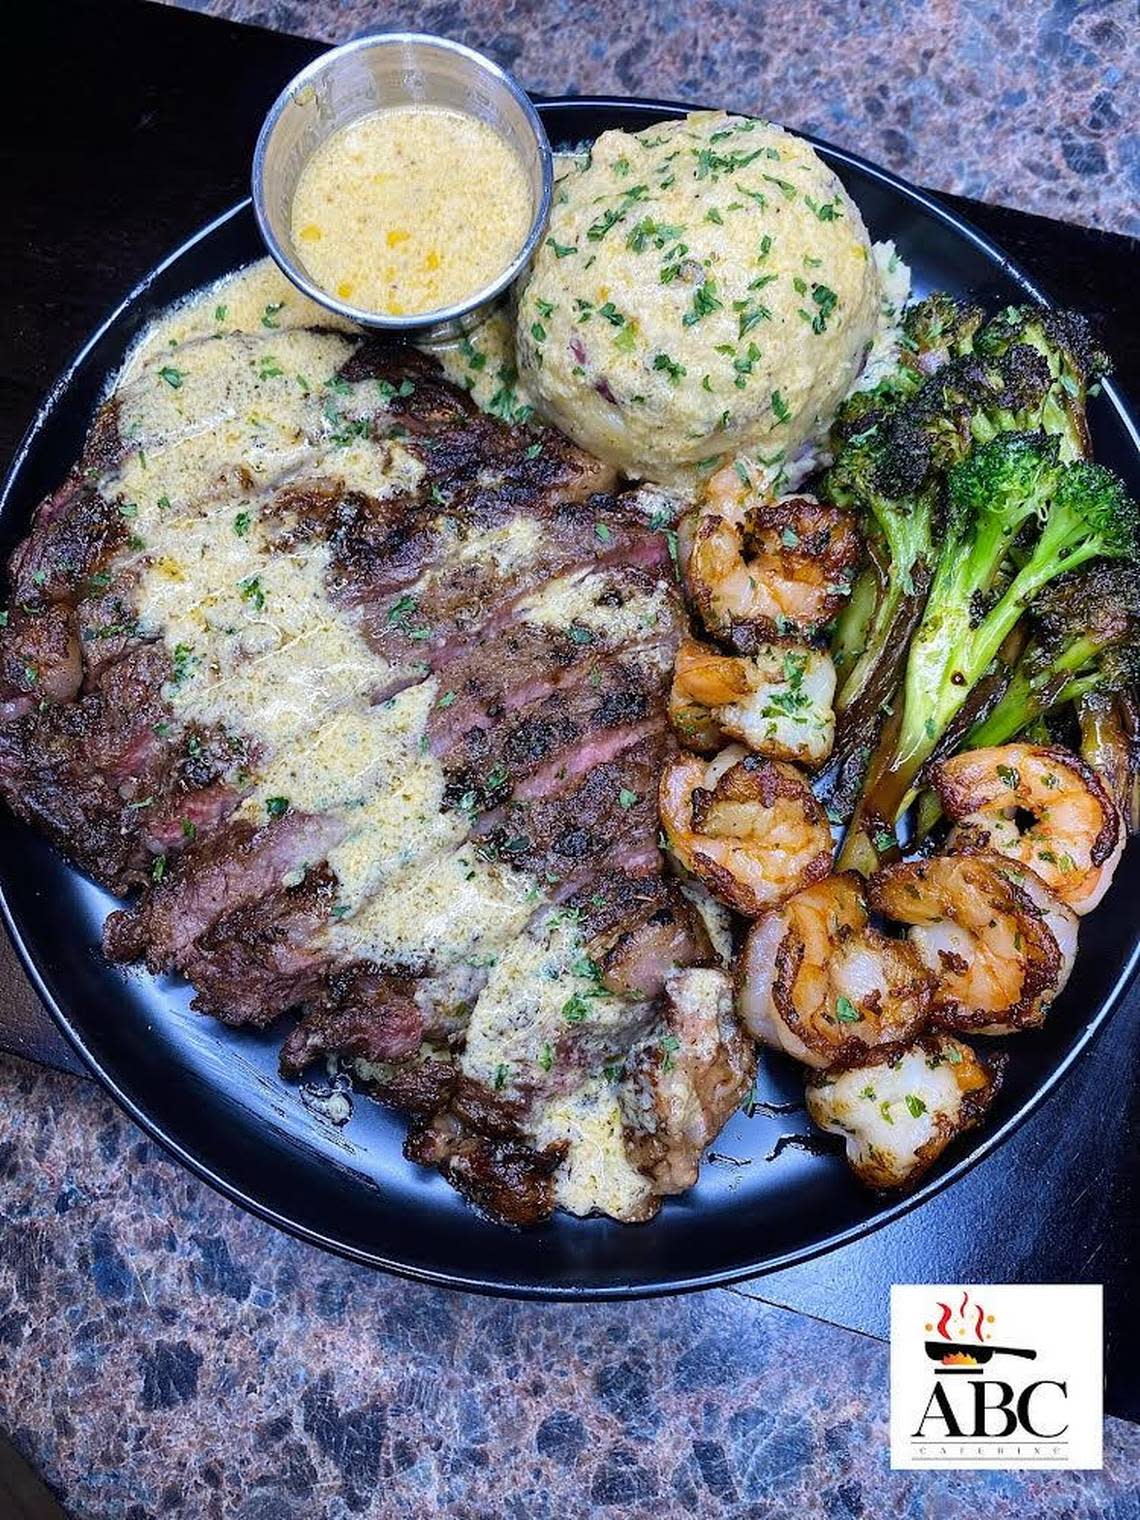 Boneless ribeye steak, sauteed shrimp, sauteed broccoli with garlic mashed potatoes finished with a special “love” sauce from ABC Catering LLC.